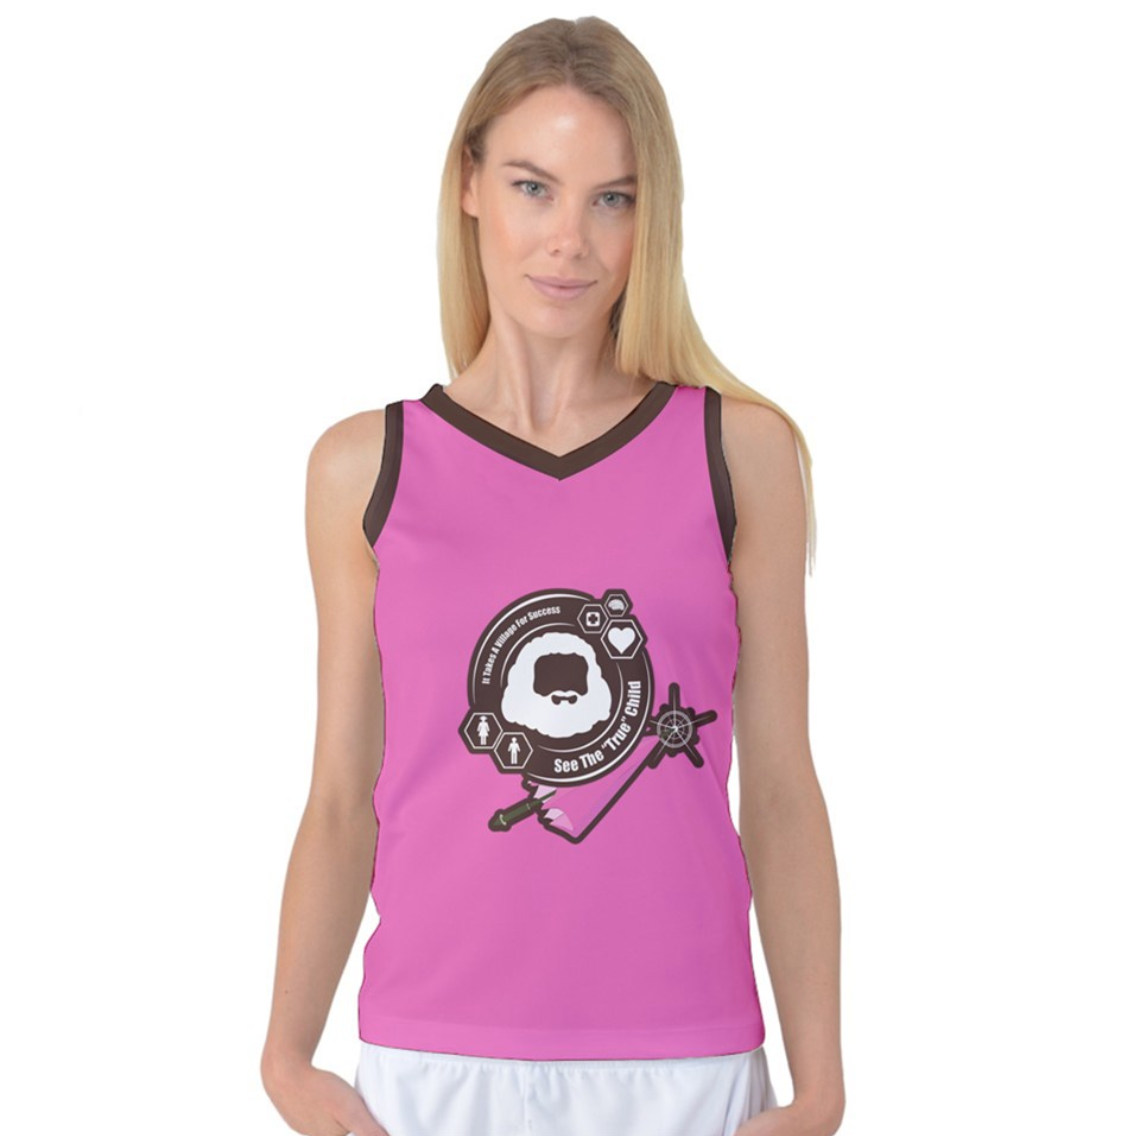 See The "TRUE" Child Women's Tank Top (Pink) - Inspired by Literary Character, Hagrid